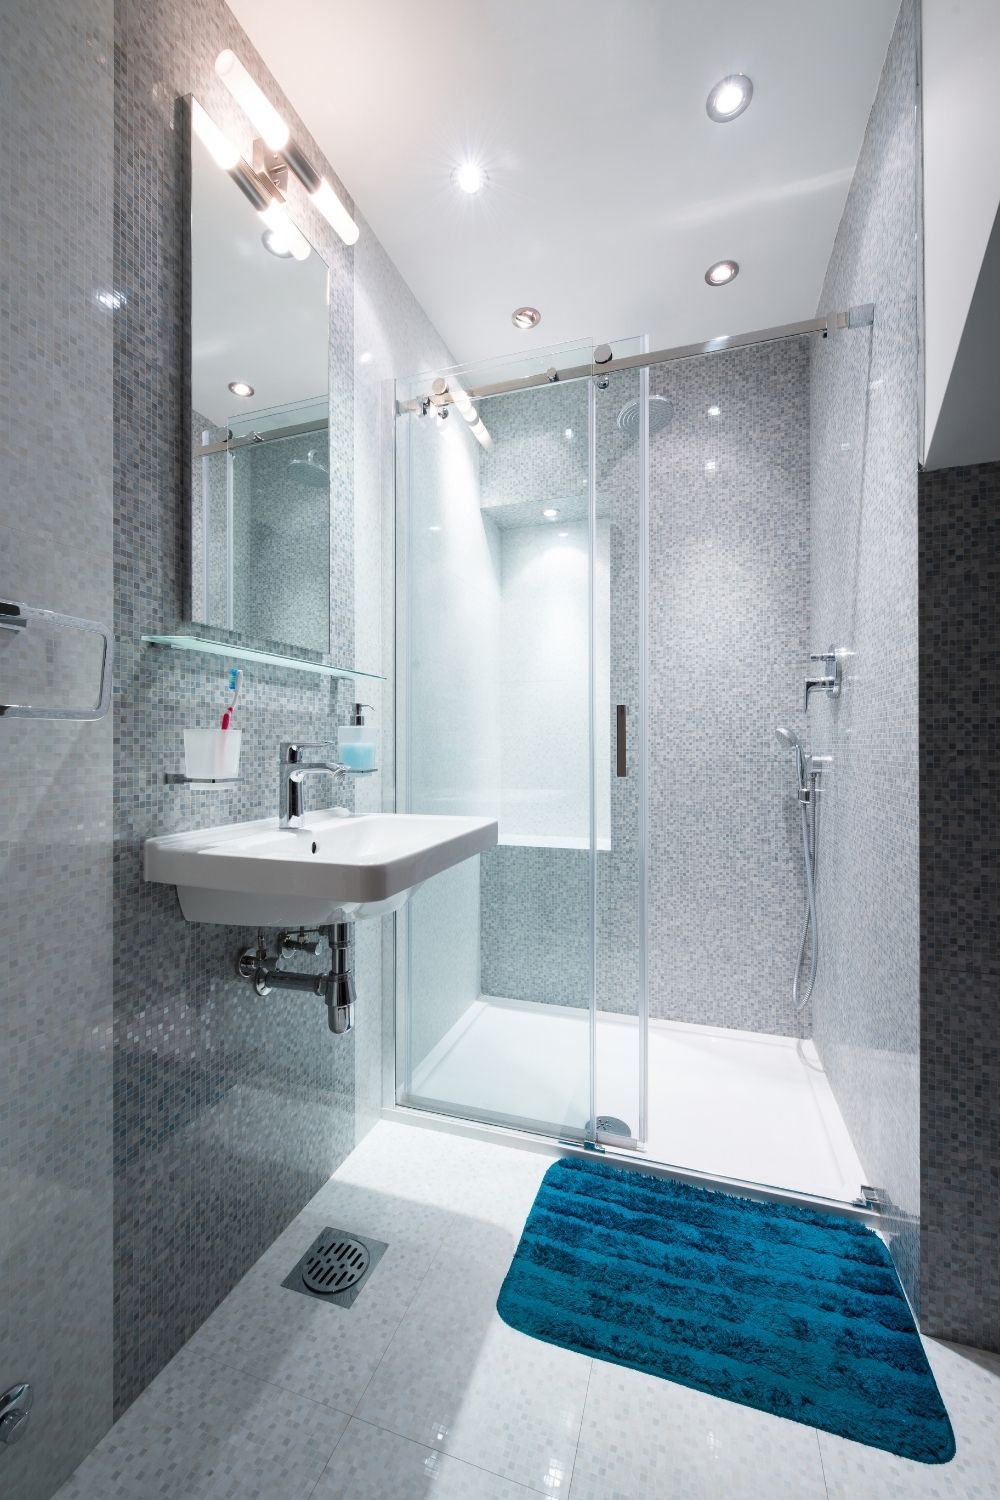 Install a corner shower with a hinged glass panel